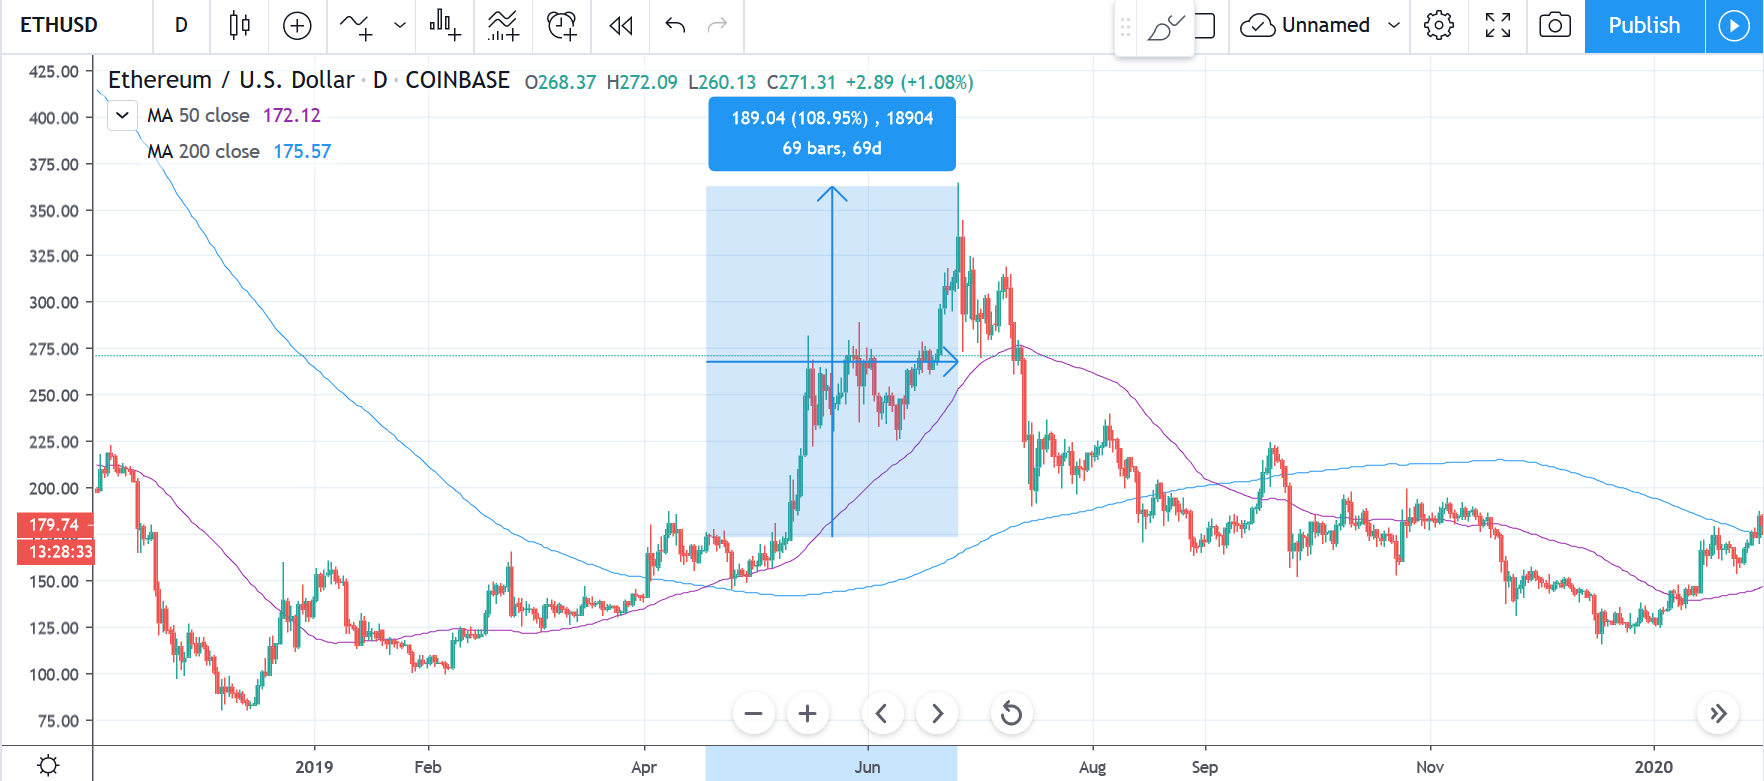 Ethereum daily chart with 50-day and 200-day MA